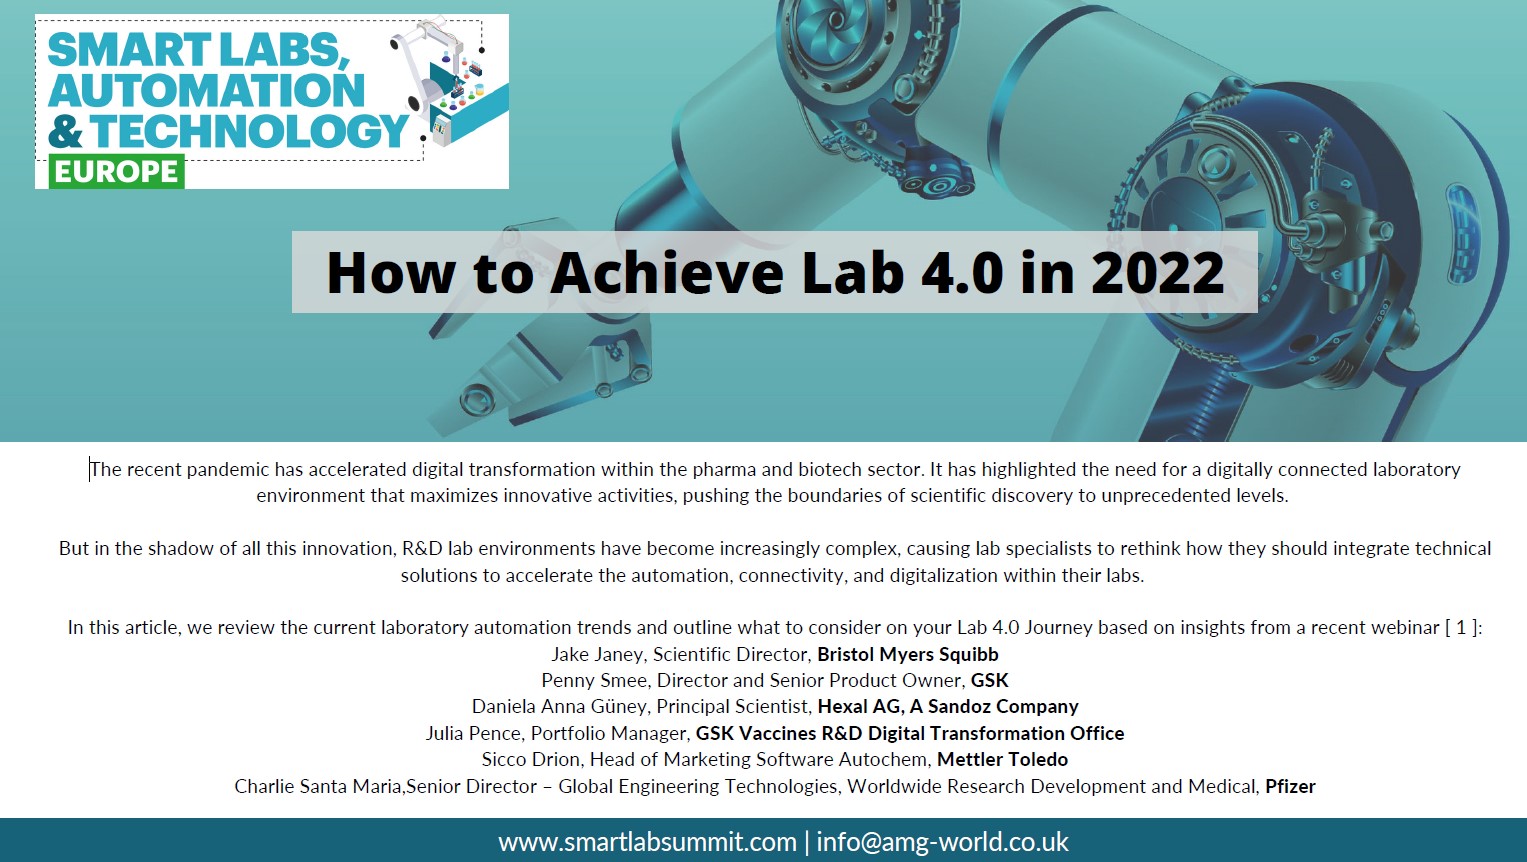 How to Achieve Lab 4.0 in 2022